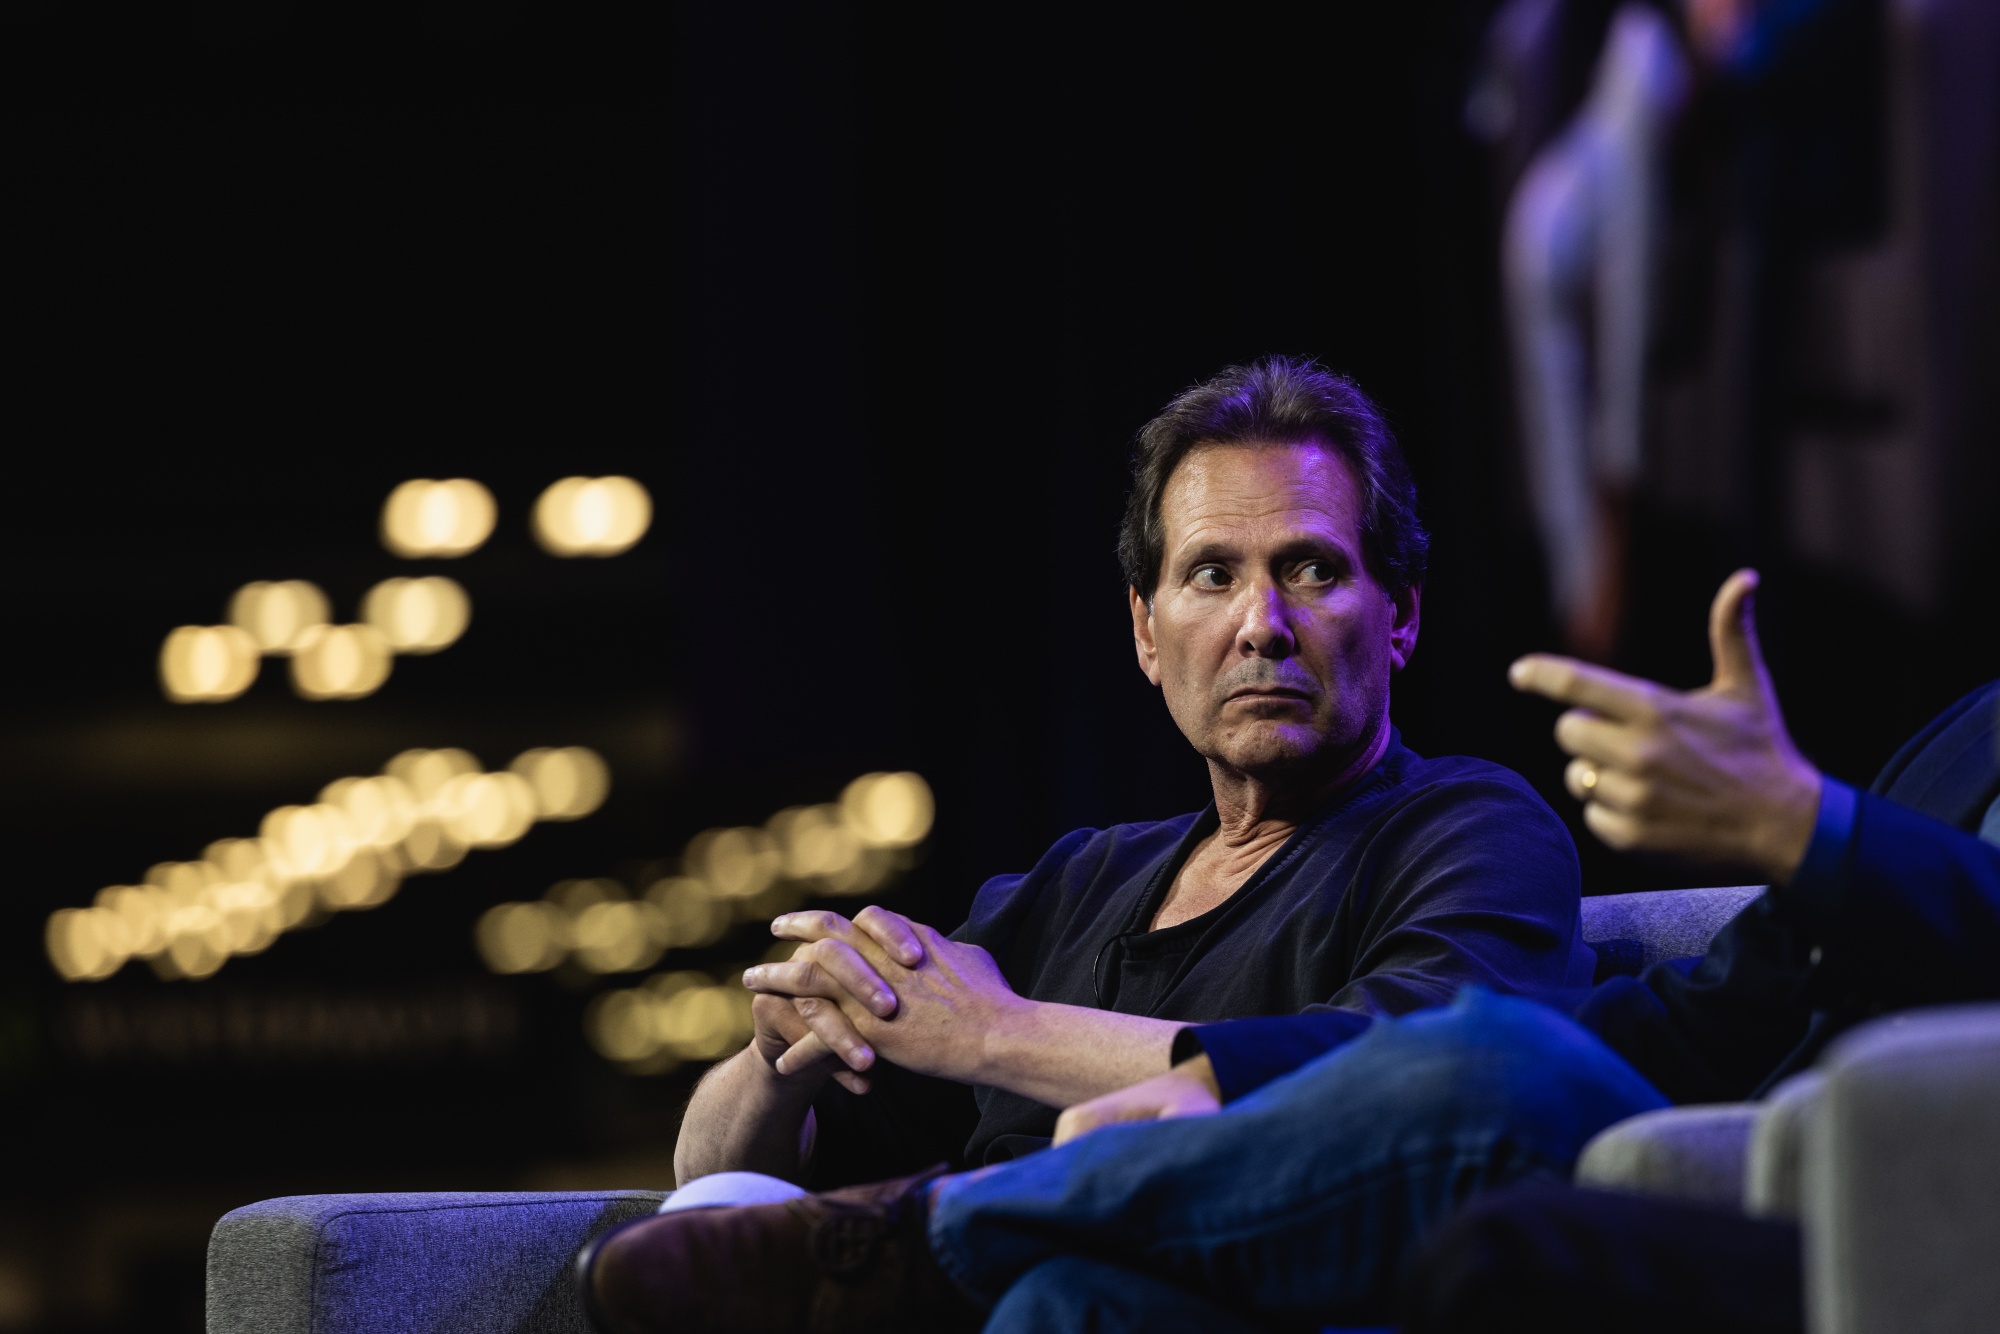 PayPal CEO Schulman to Retire at End of Year as Growth Slows - Bloomberg